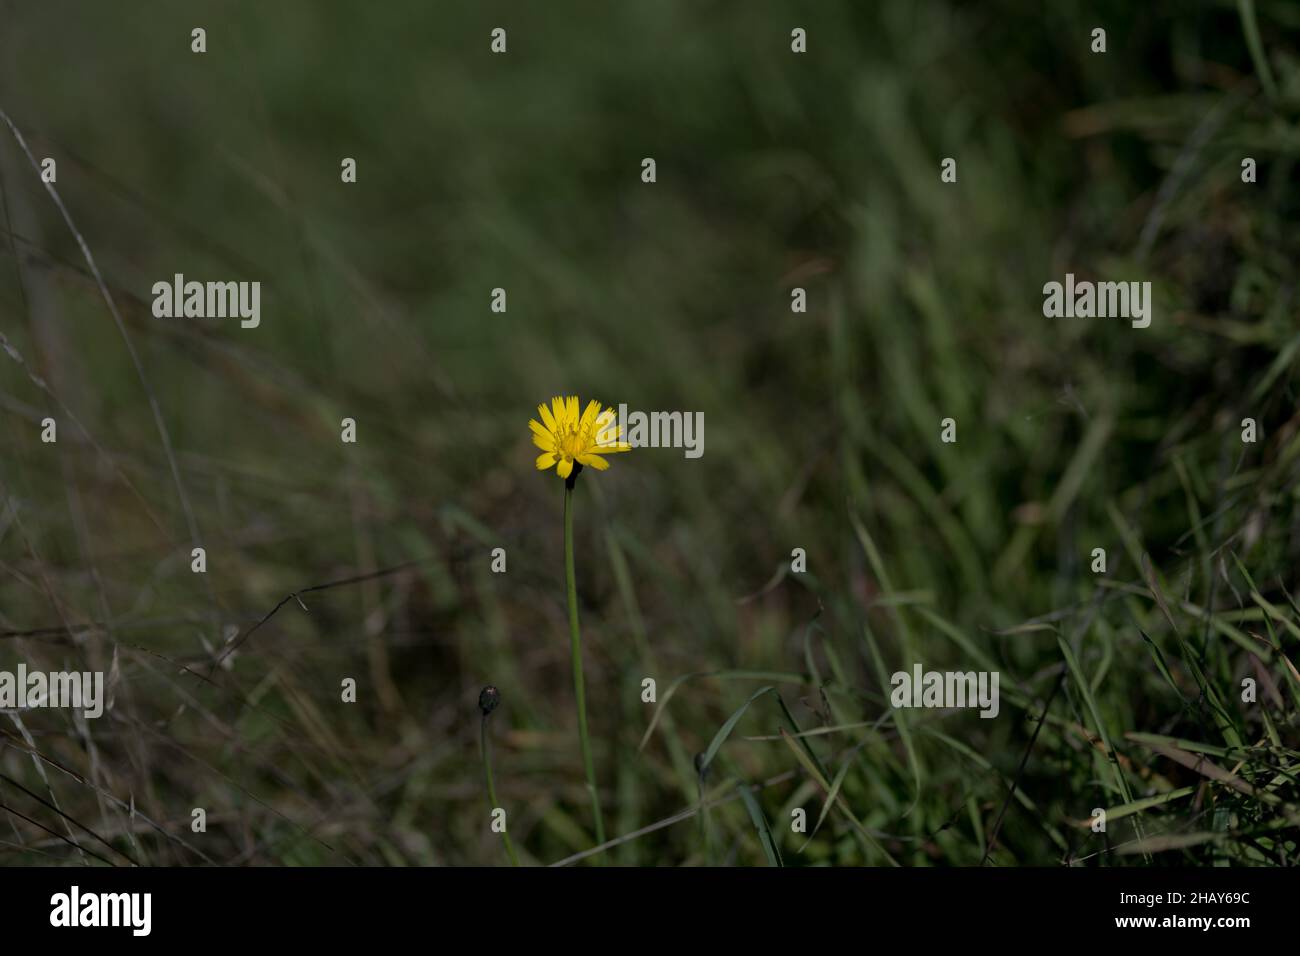 Closeup shot of a single Leontodon autumnalis yellow flower in the field among green grass Stock Photo